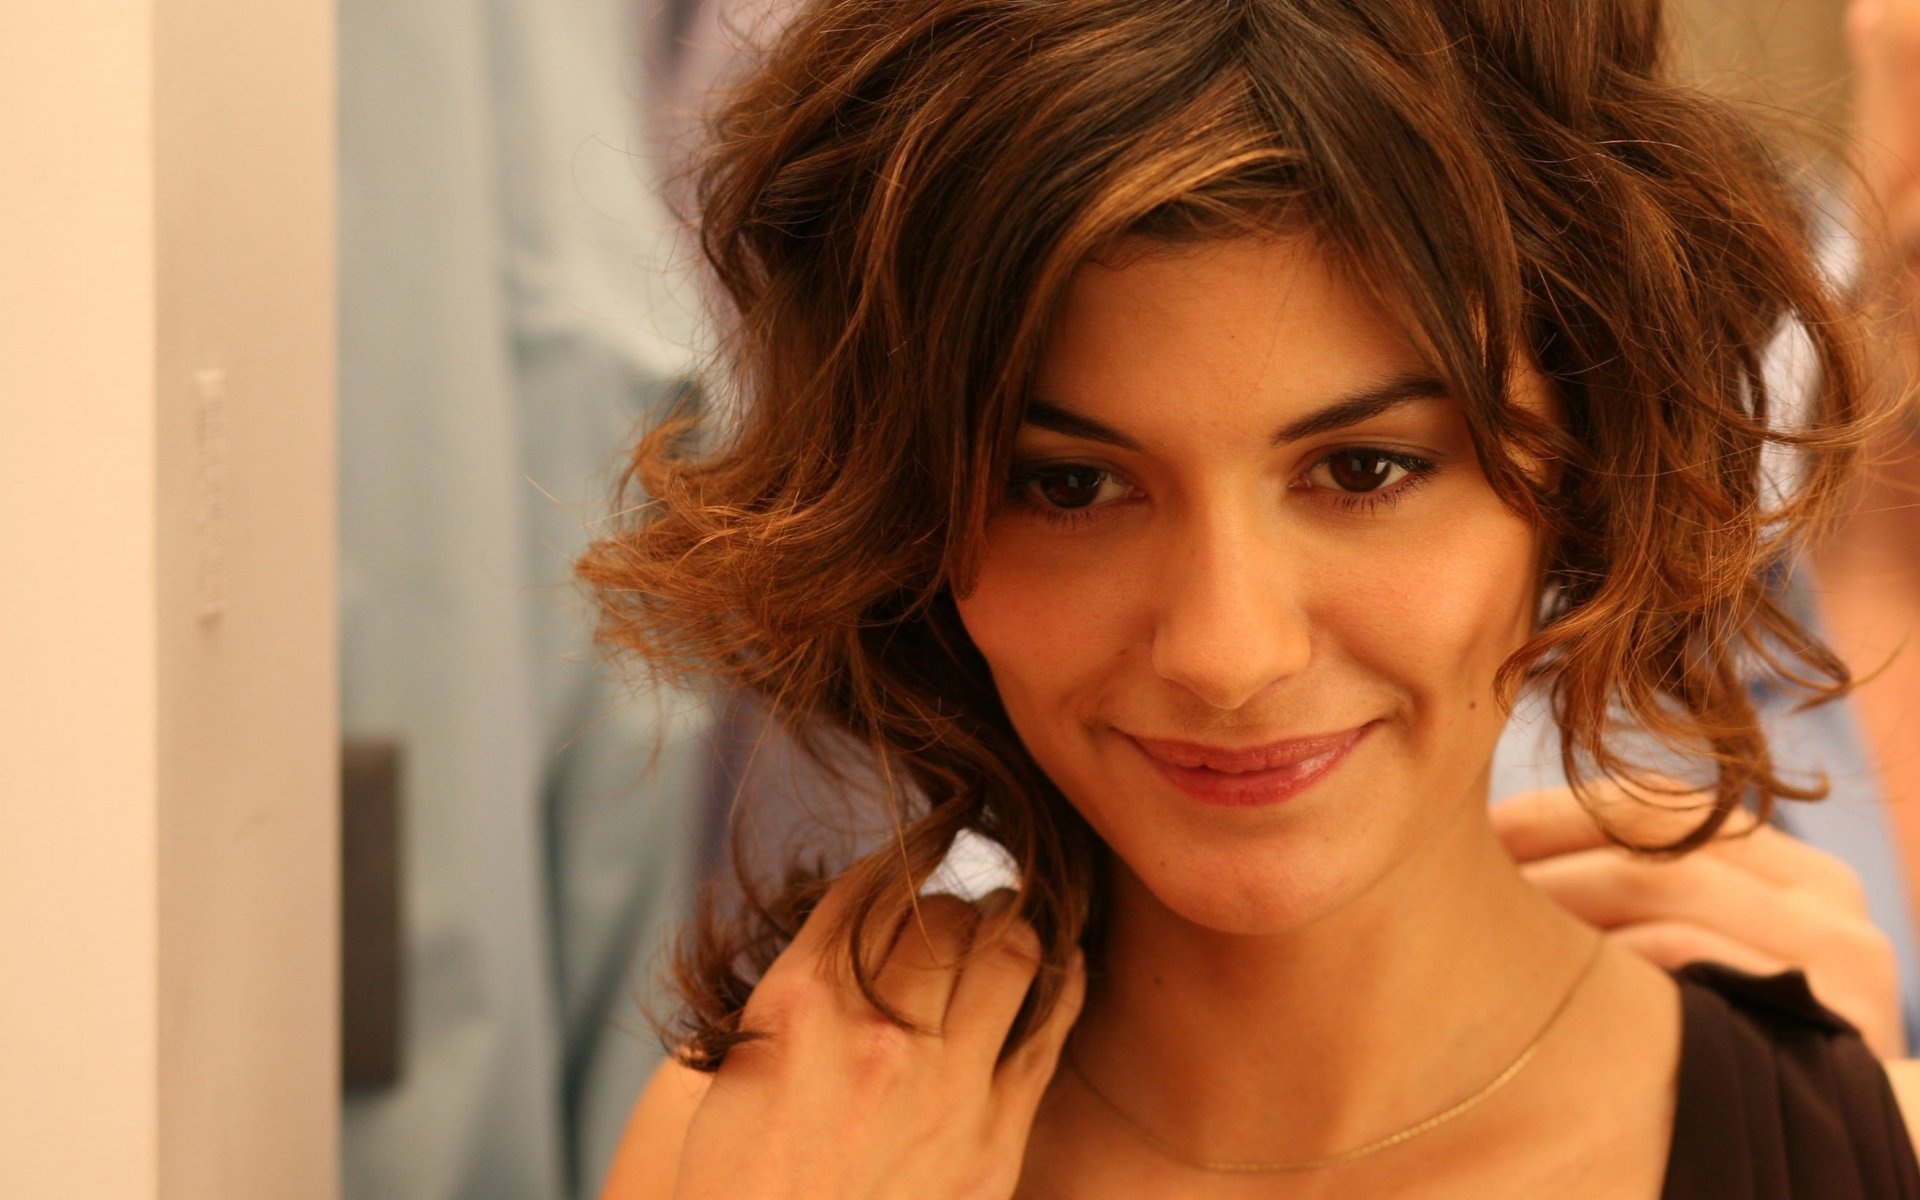 Audrey Tautou: Audrey Tautou As Irene In French Film 'Priceless'. 1920x1200 HD Wallpaper.